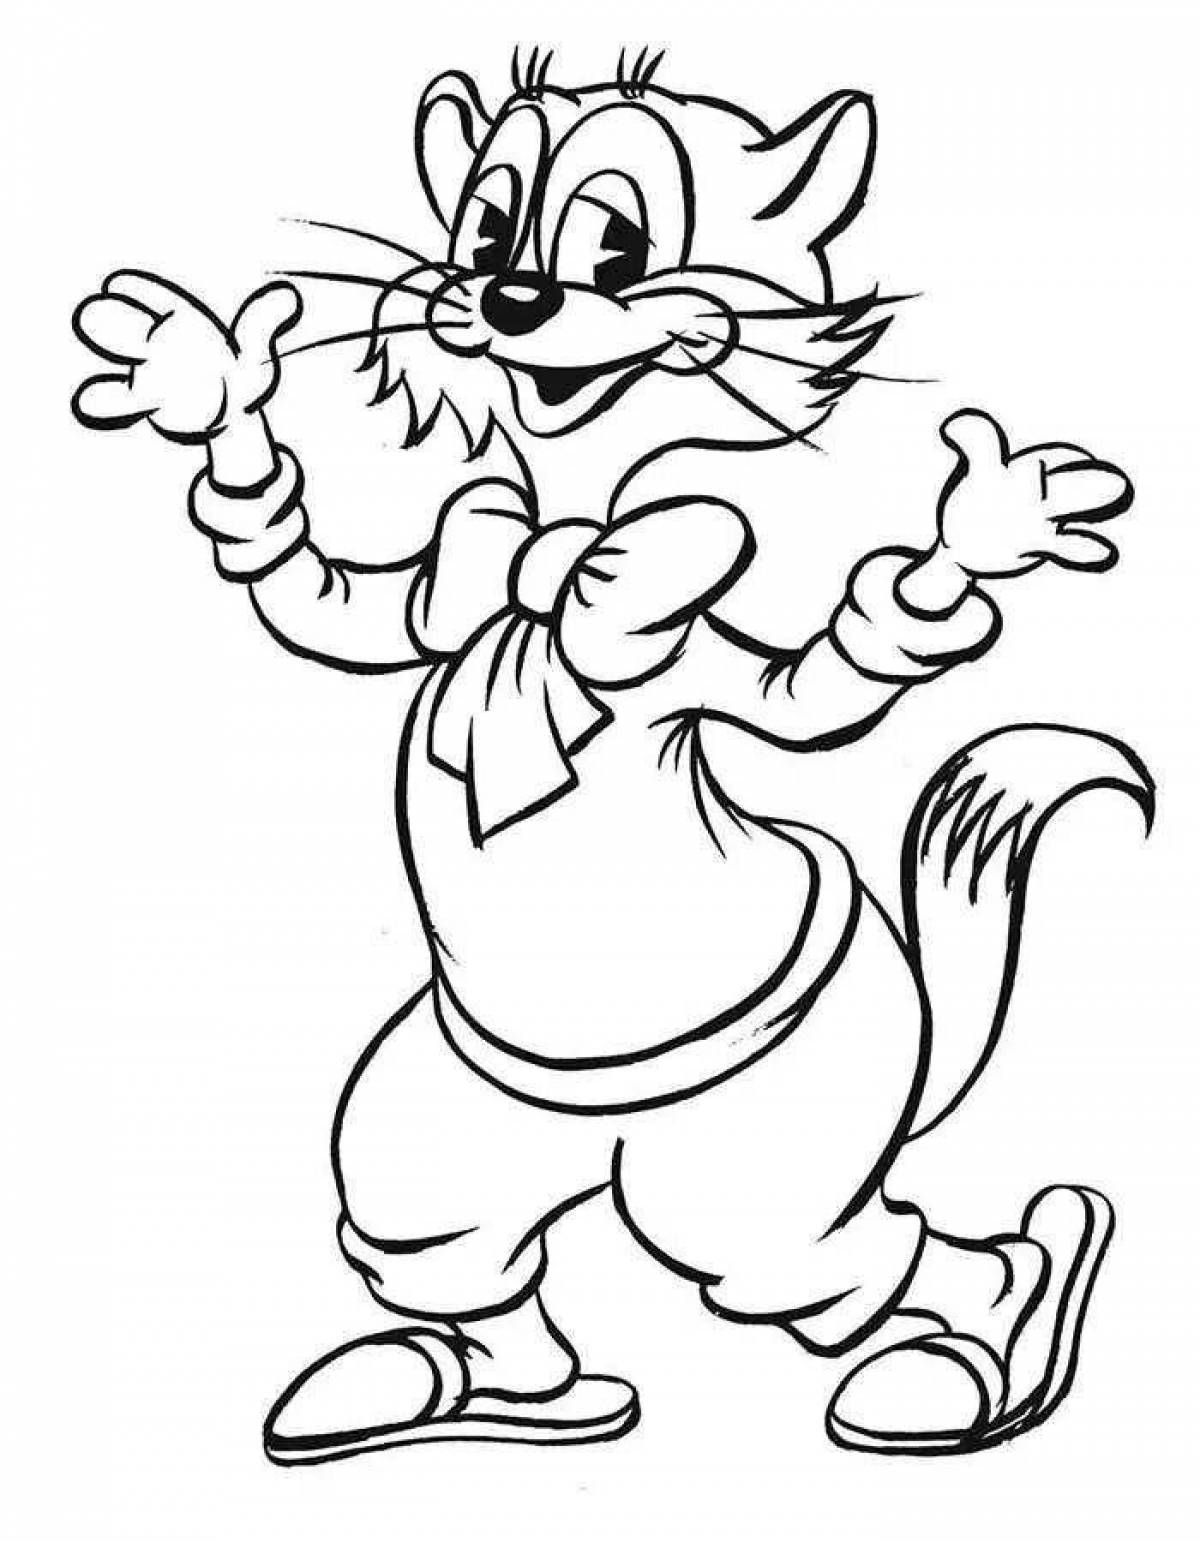 Fat cartoon character coloring page